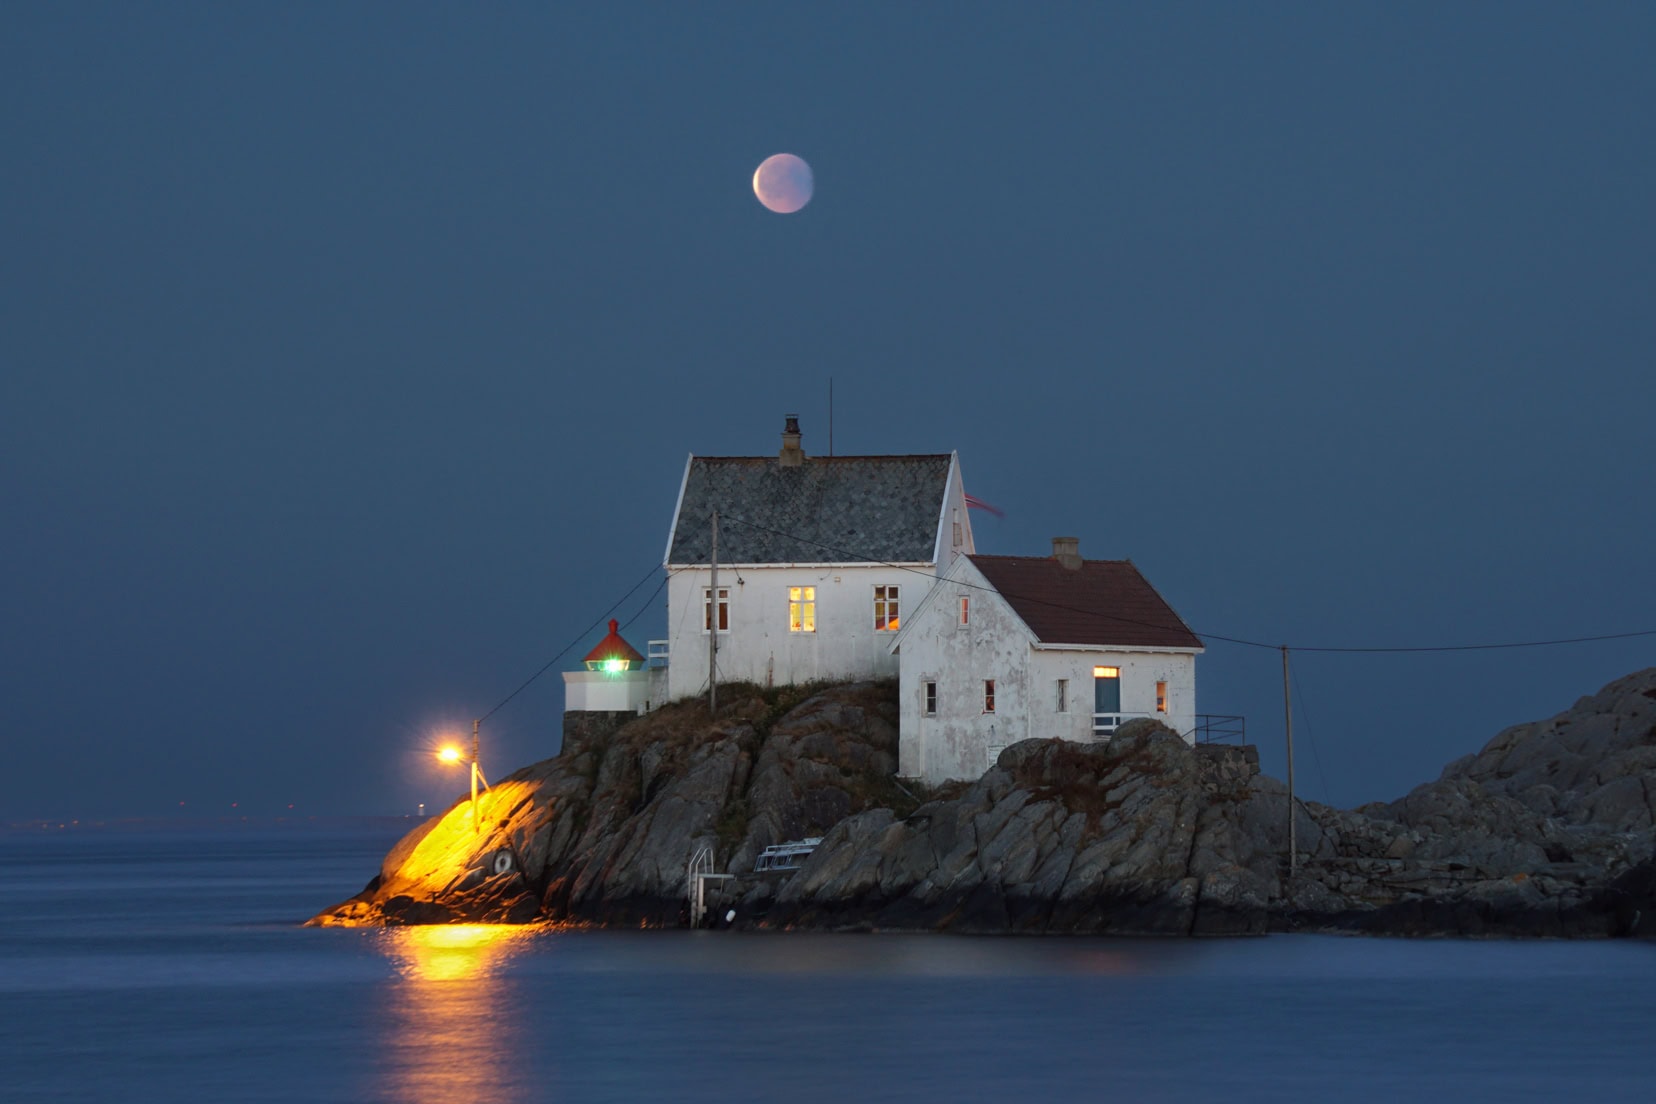 blood moon norway rising over a white building on rocks in the ocean